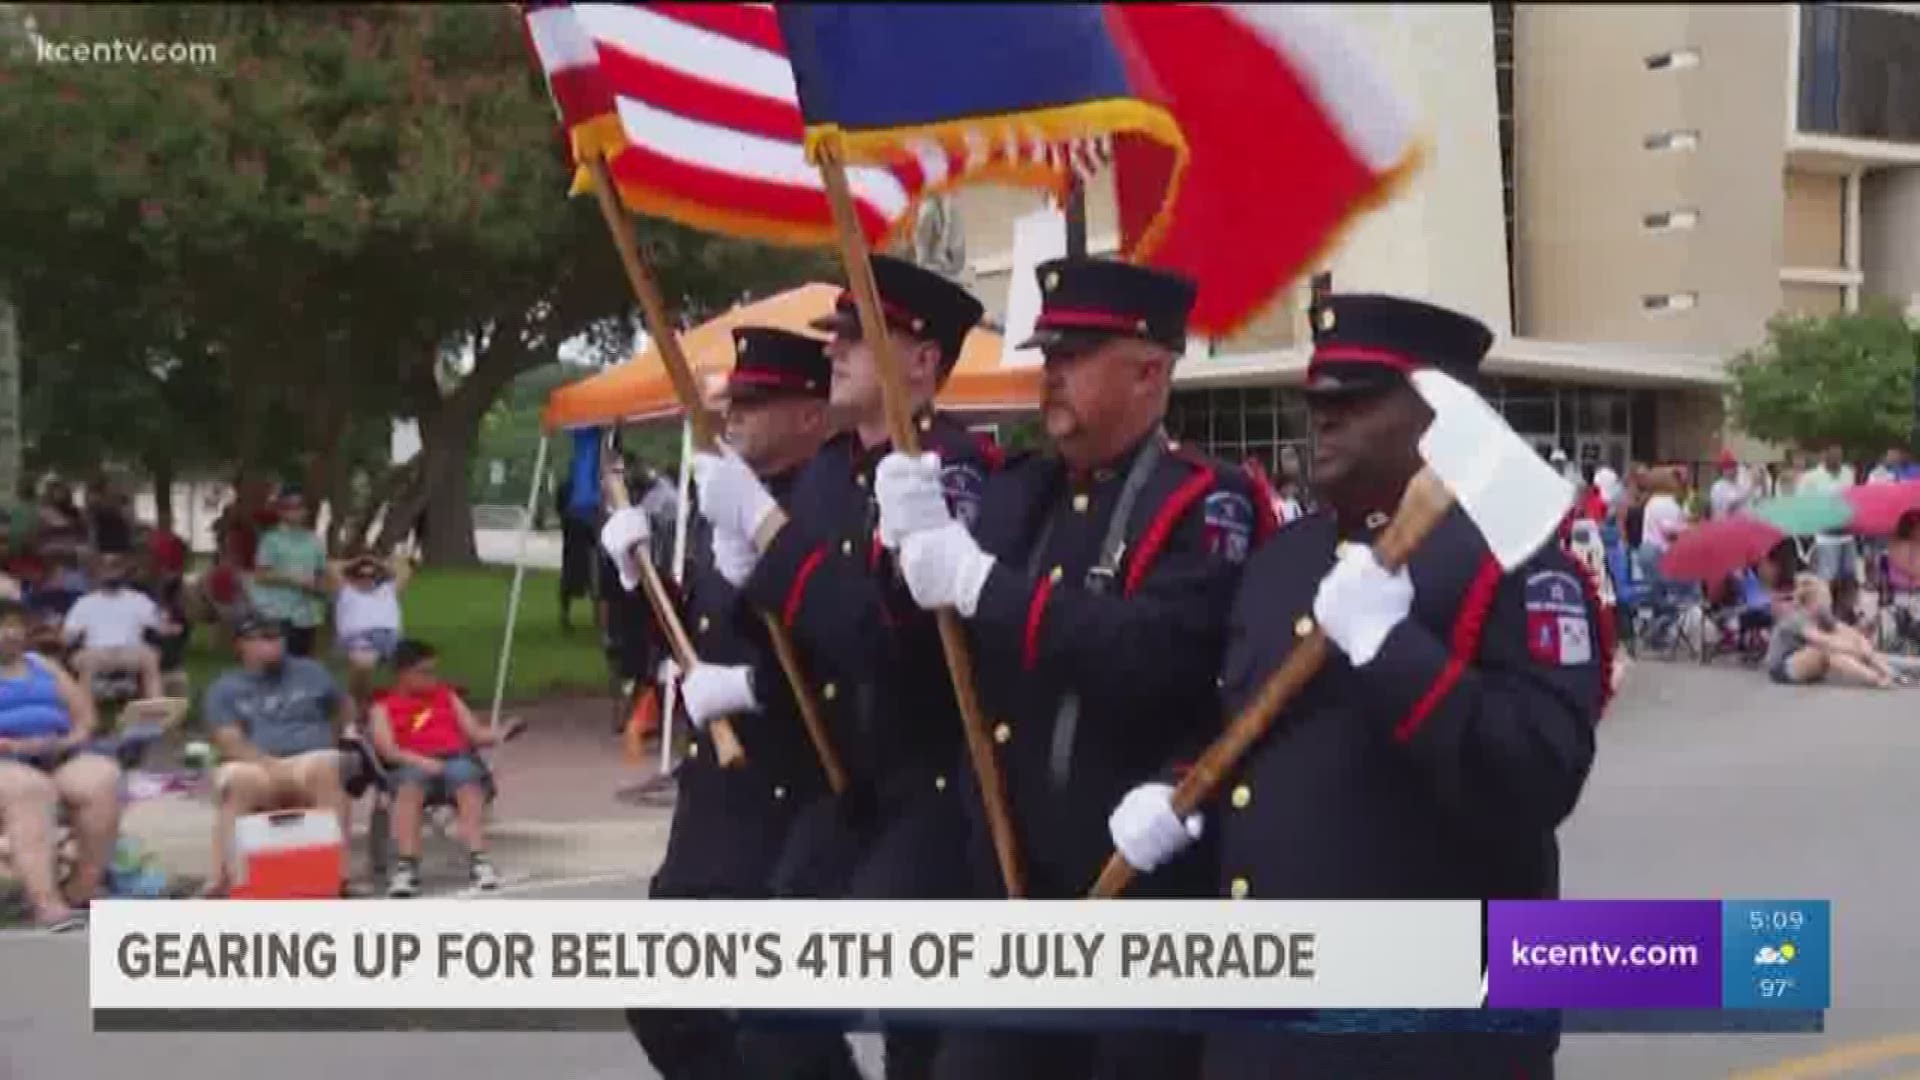 Belton's 4th of July Parade is right around the corner. 